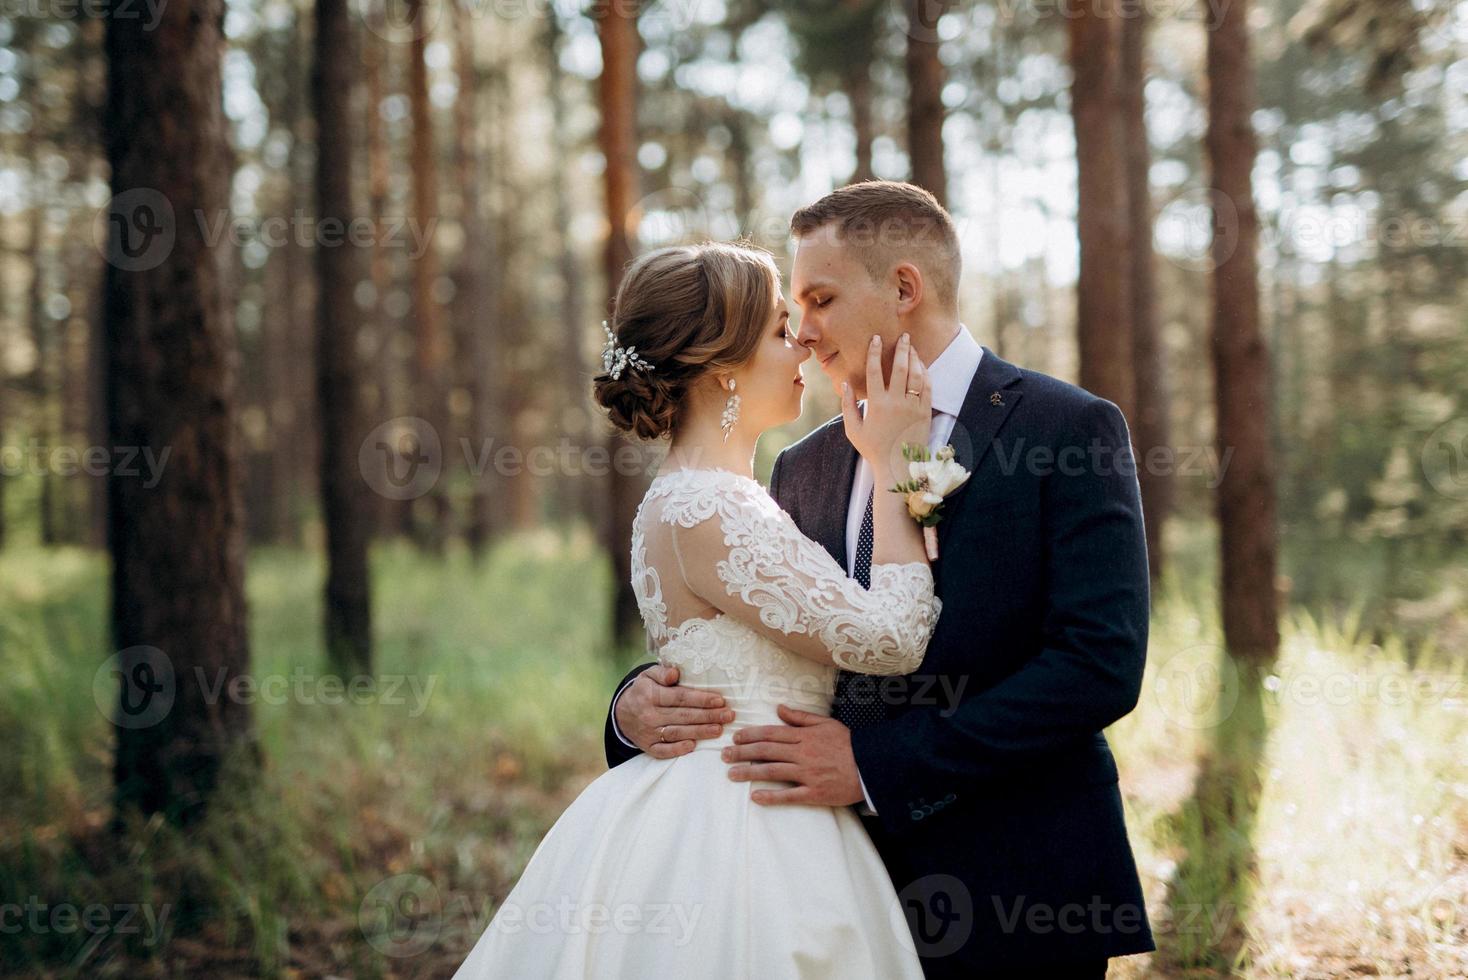 the bride and groom are walking in a pine forest photo